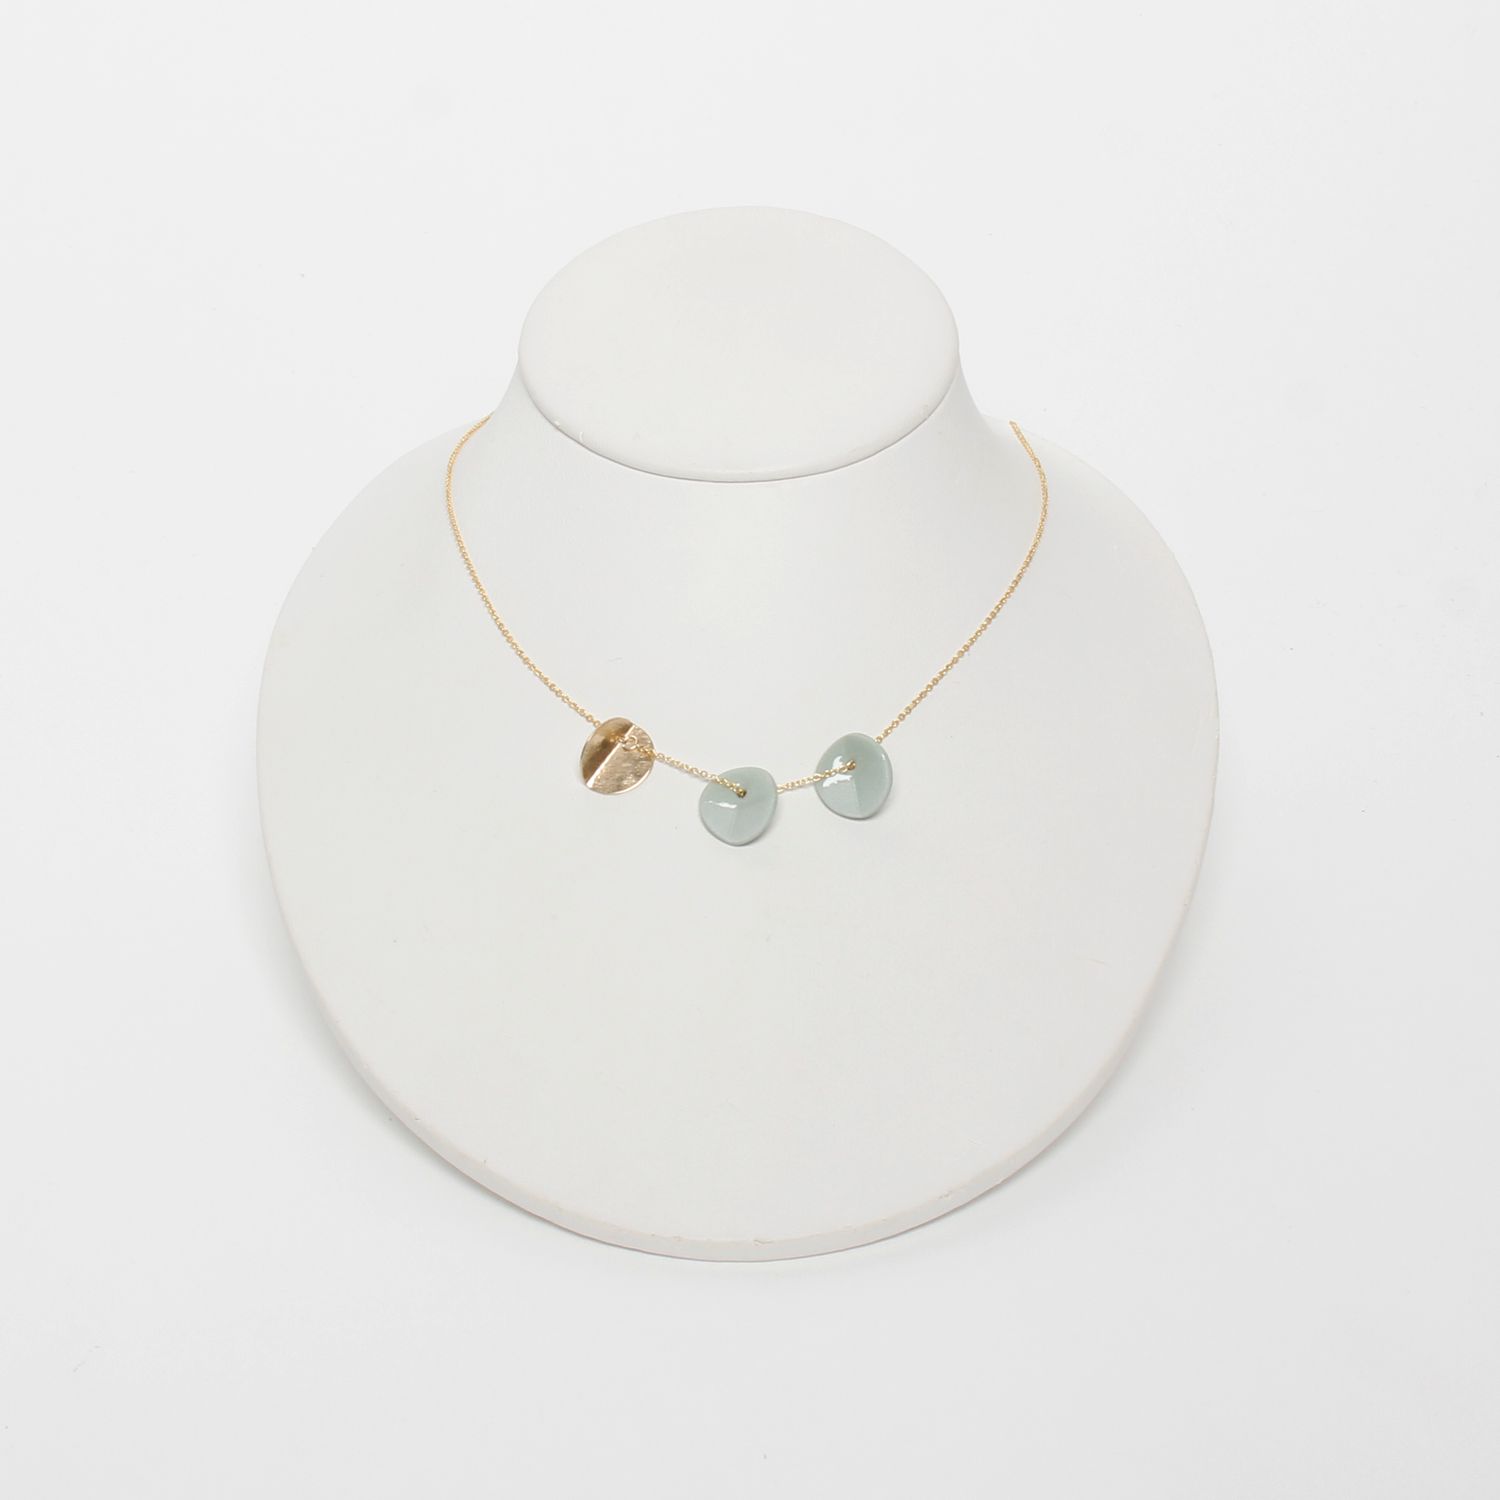 Chayle Jewellry: Eucalyptus Triple Teal and Gold Pendant Product Image 1 of 2